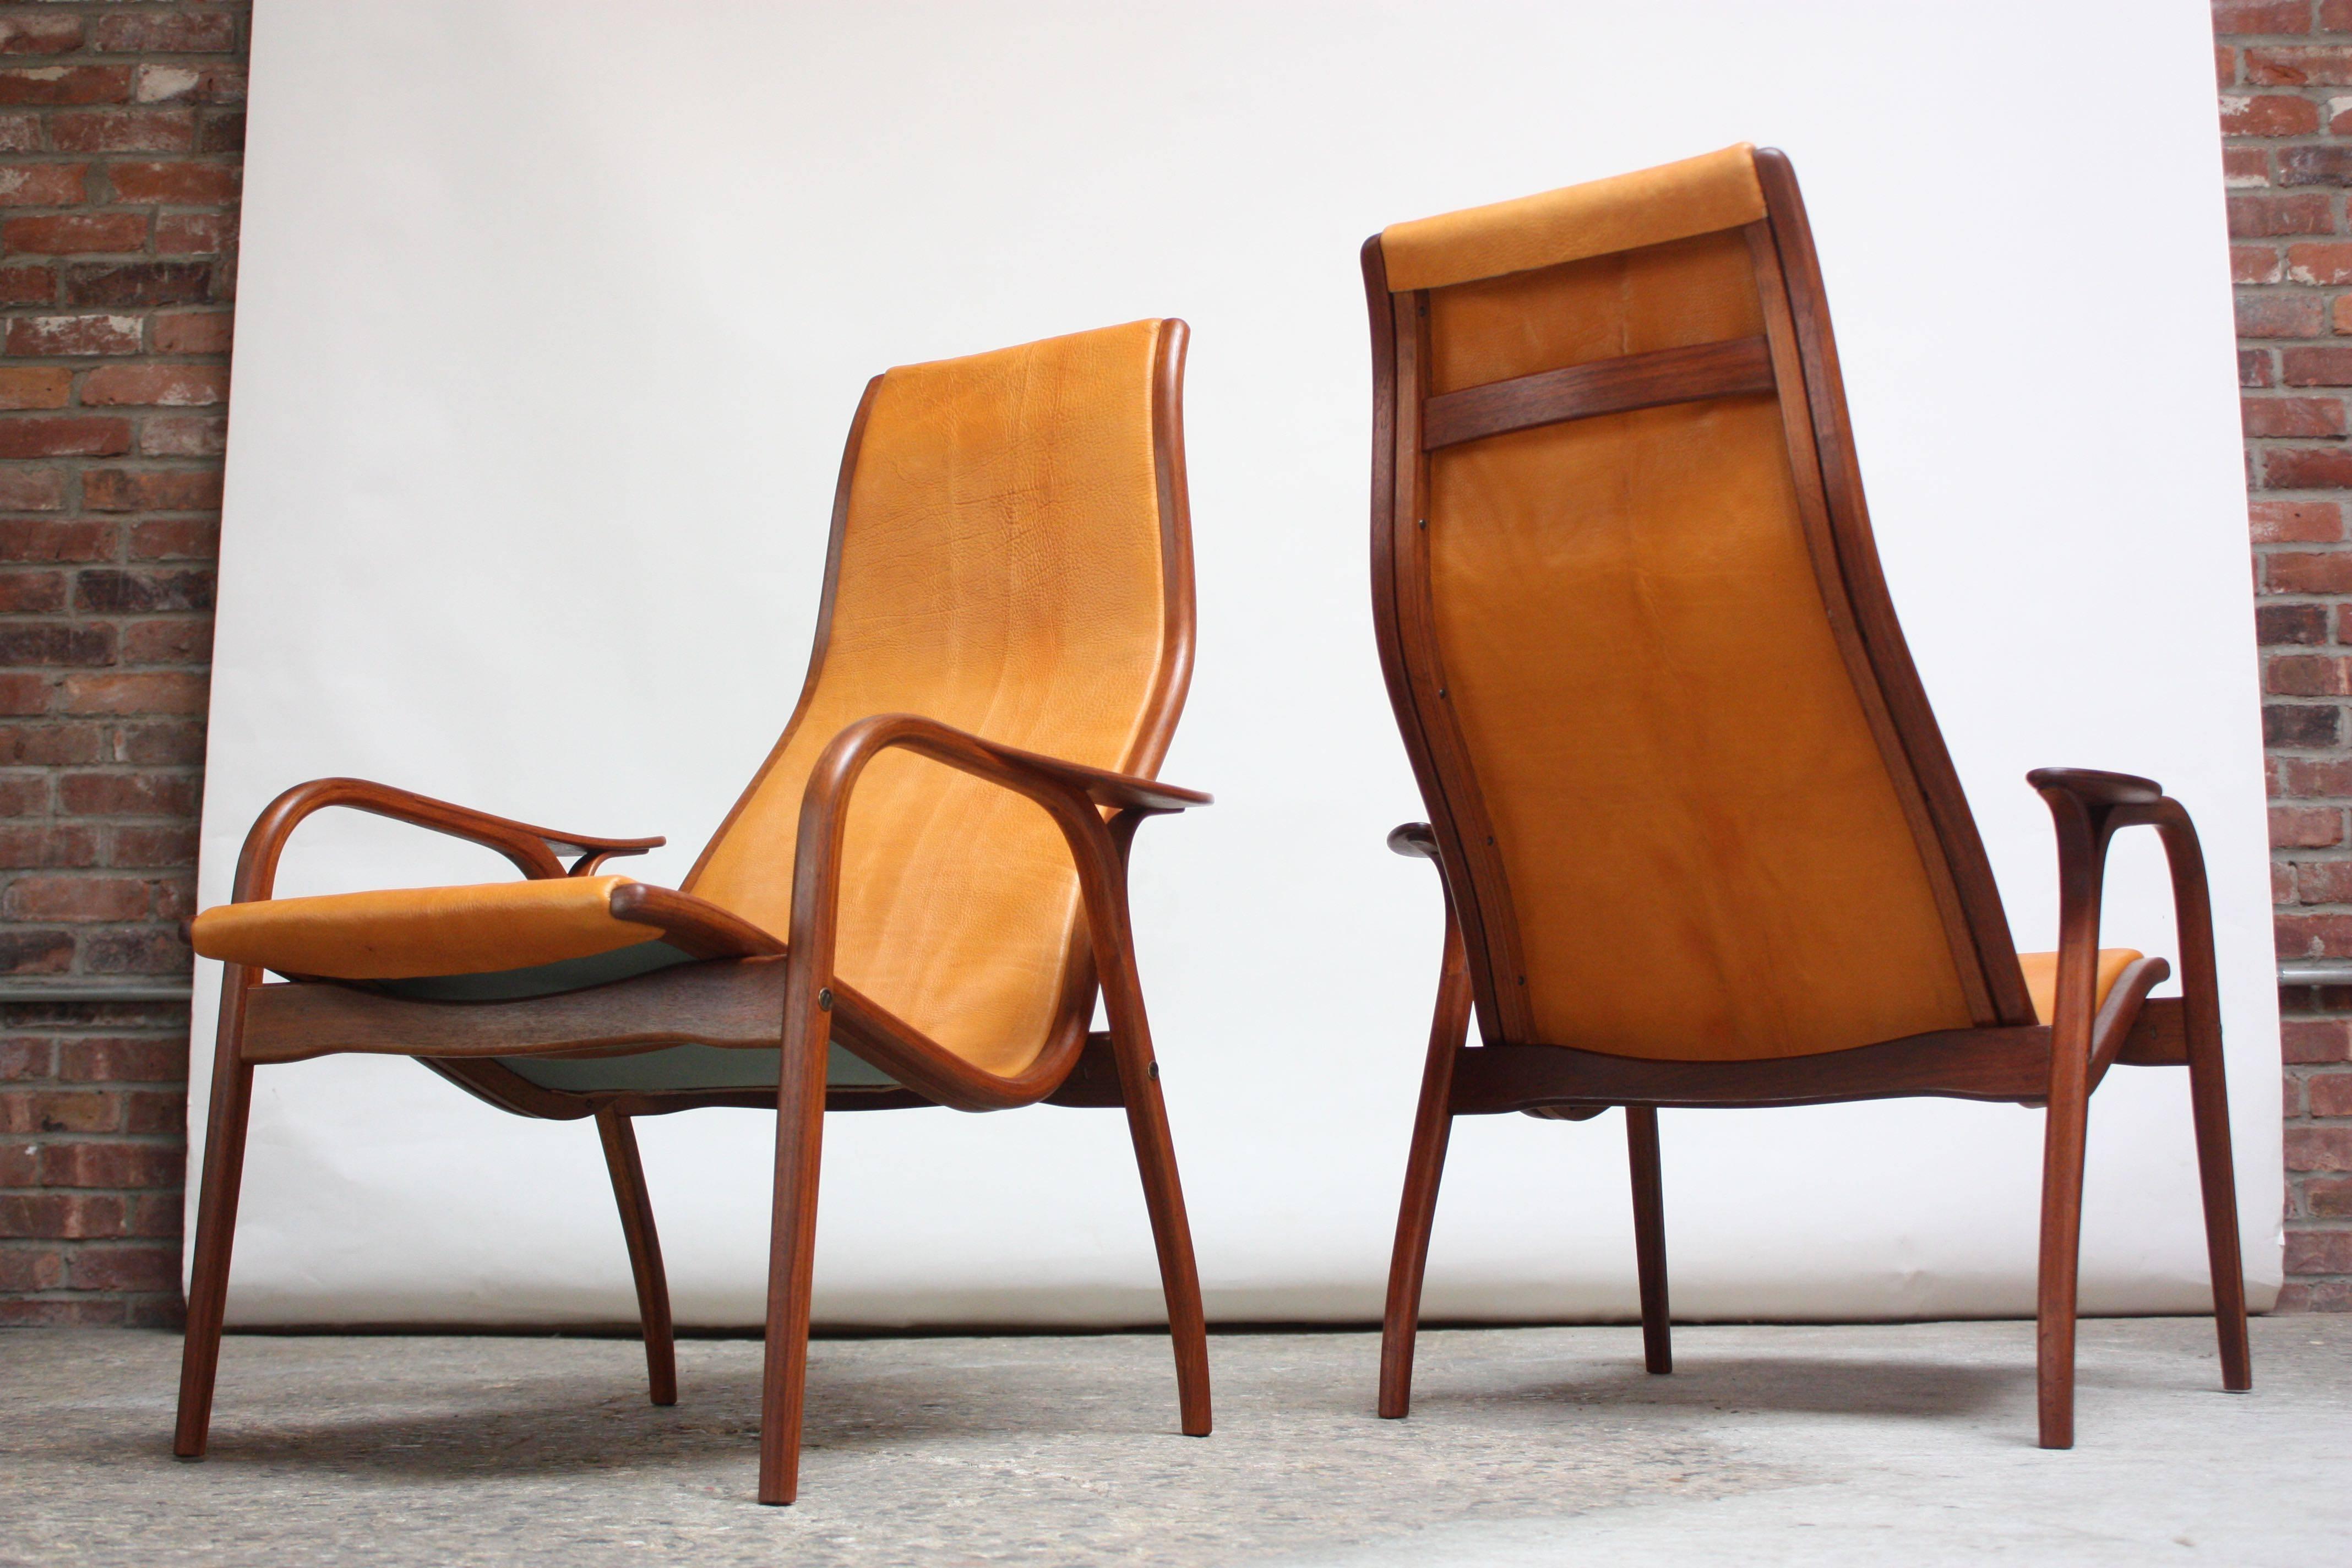 Yngve Ekström 'Lamino' Chairs for ESE-Möbler / Swedese, circa 1956, Sweden. Composed of laminated teak frames and newly upholstered in leather. The hides used are vintage (1970s) and very dense; the leather will age and thin nicely over time. The